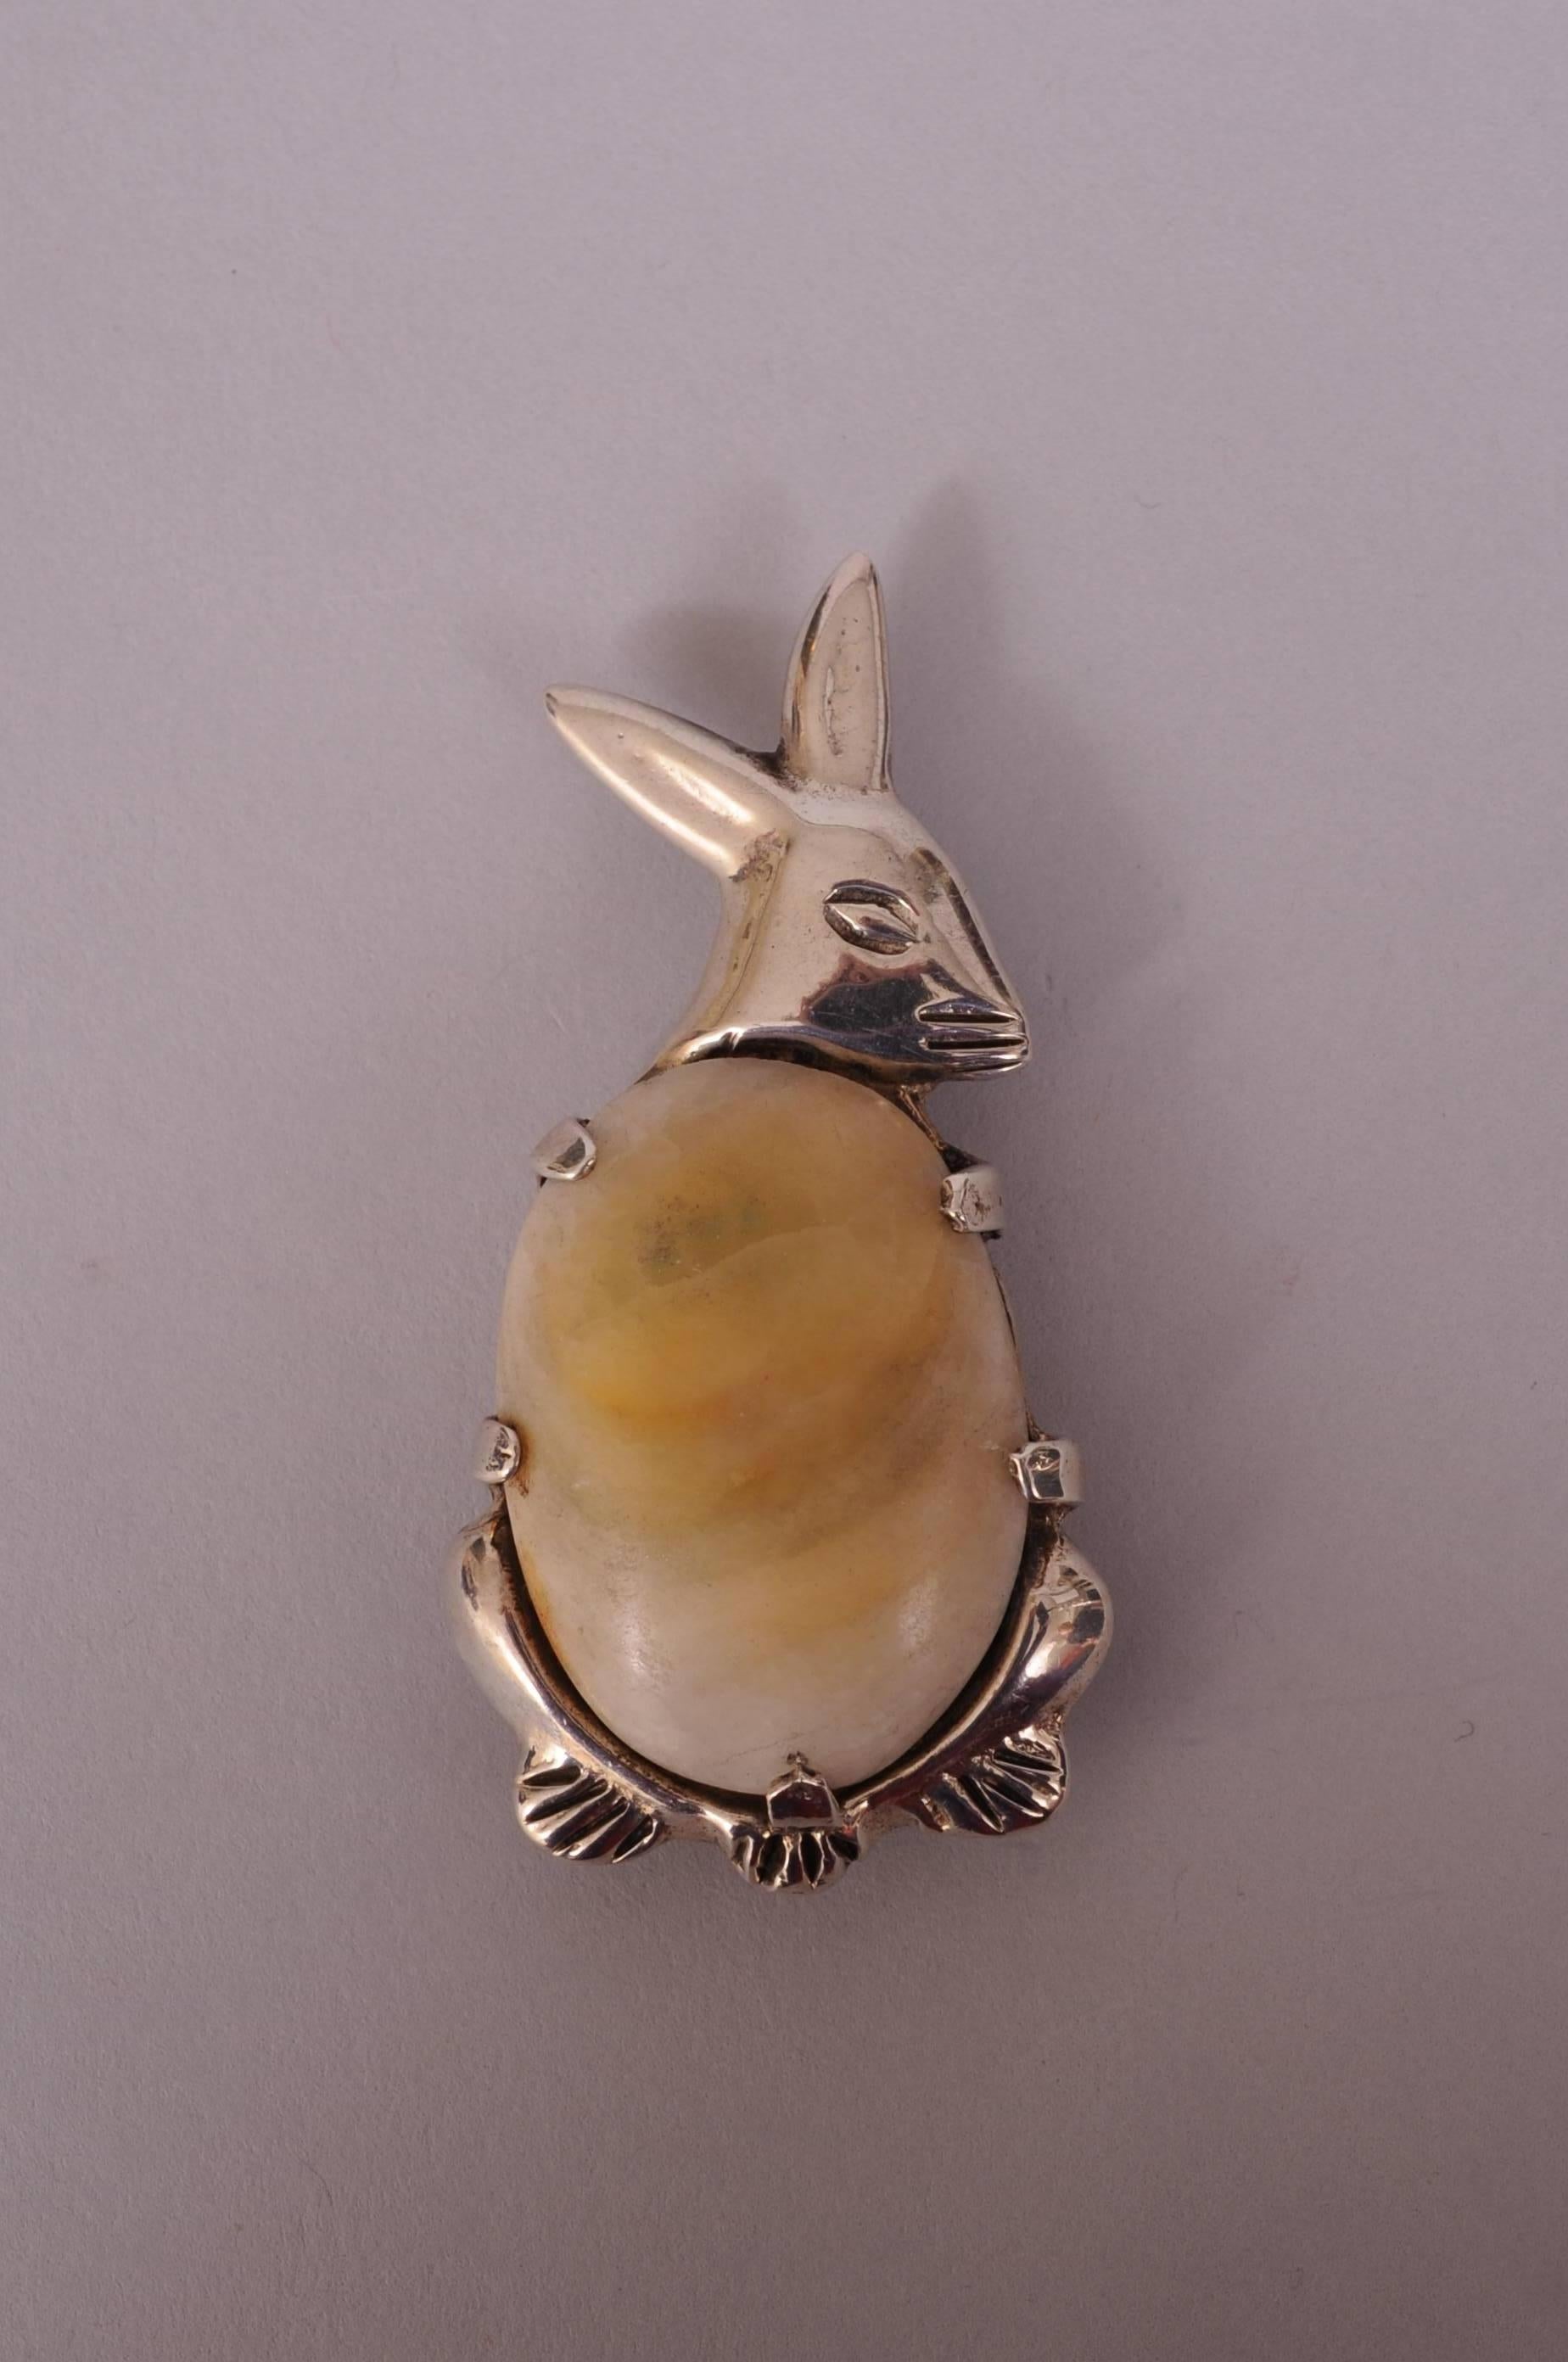 This charming little fellow has a sterling silver body surrounding his plump belly made from a large piece of agate. He is in excellent condition and marked Silver and Mexico on the back.
Measurements;   Height 3 3/4